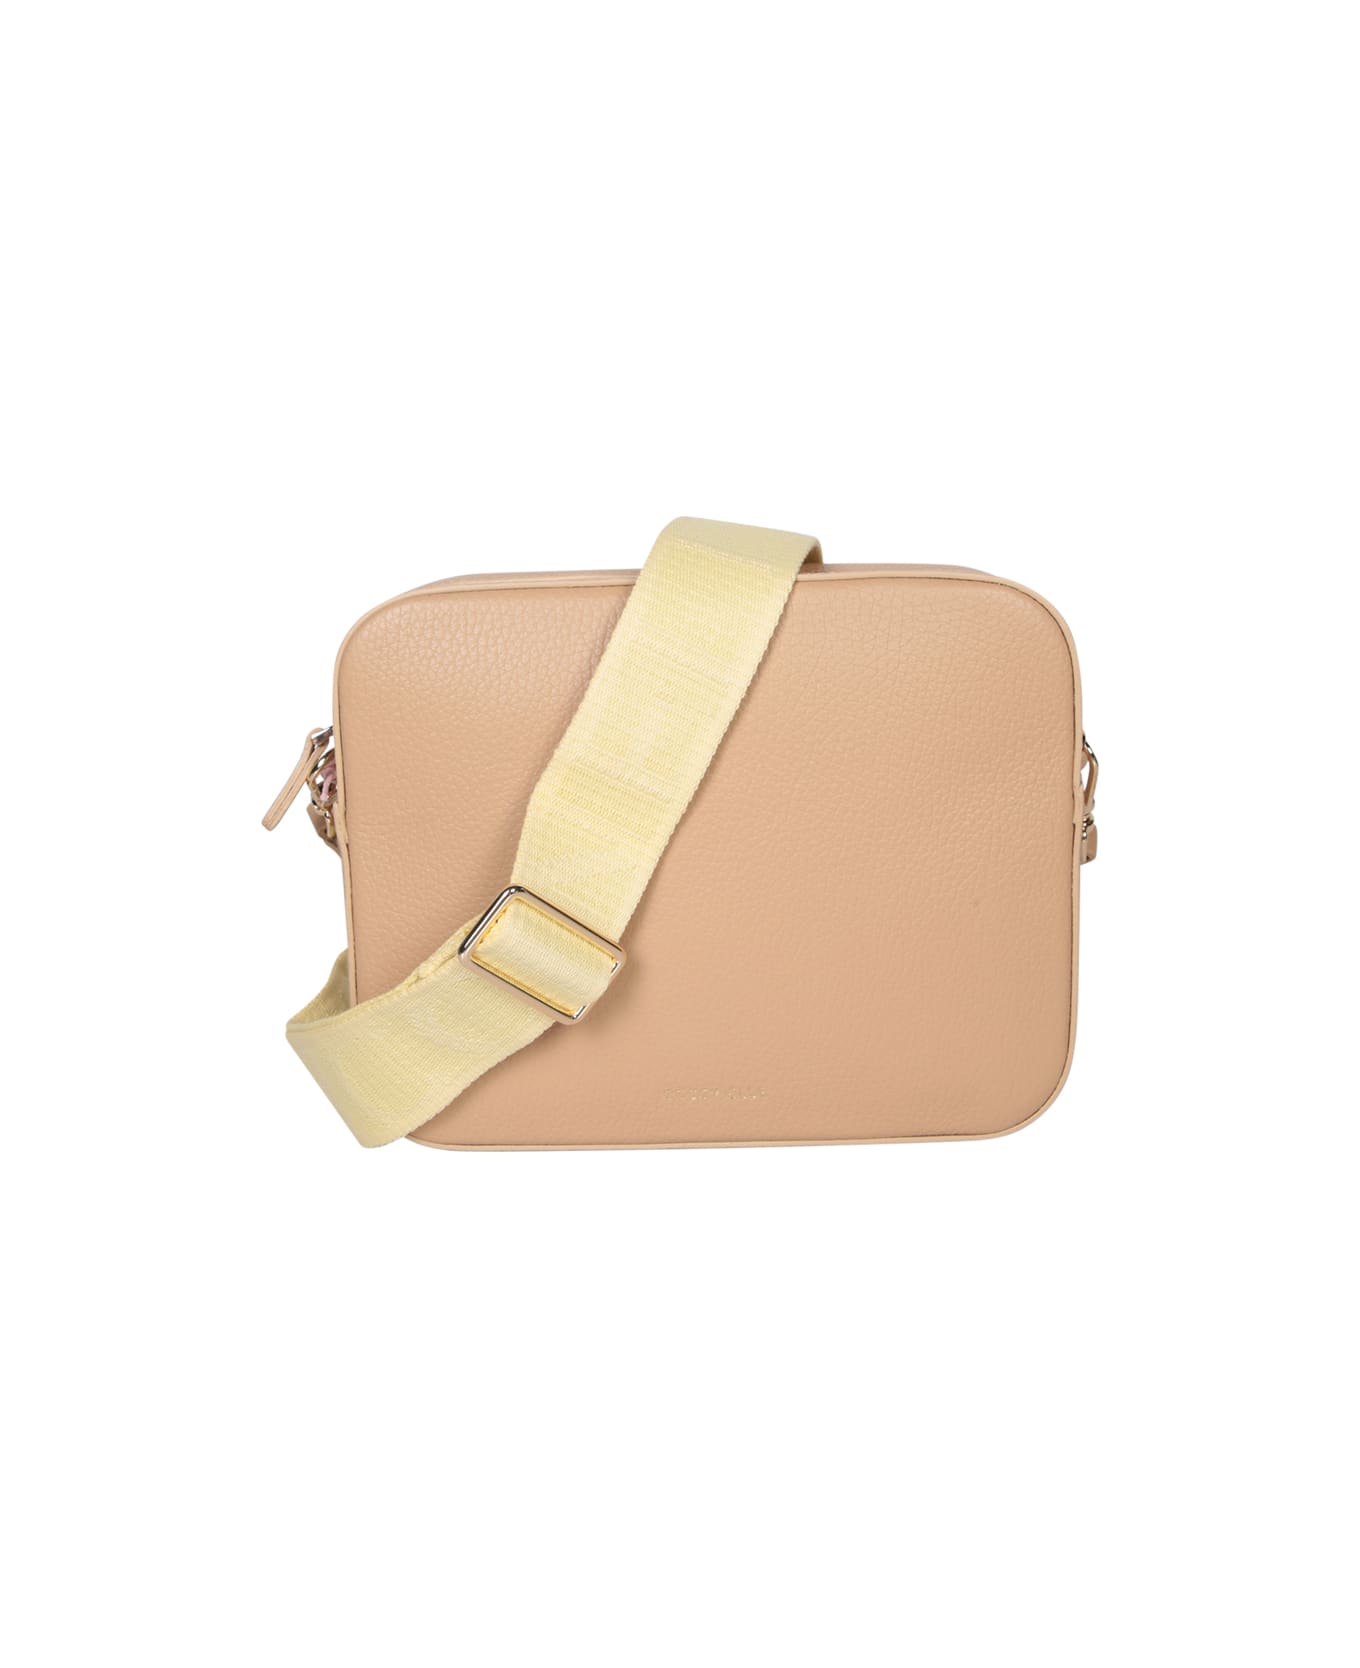 Coccinelle Tebe Small Beige Bag - Beige ショルダーバッグ